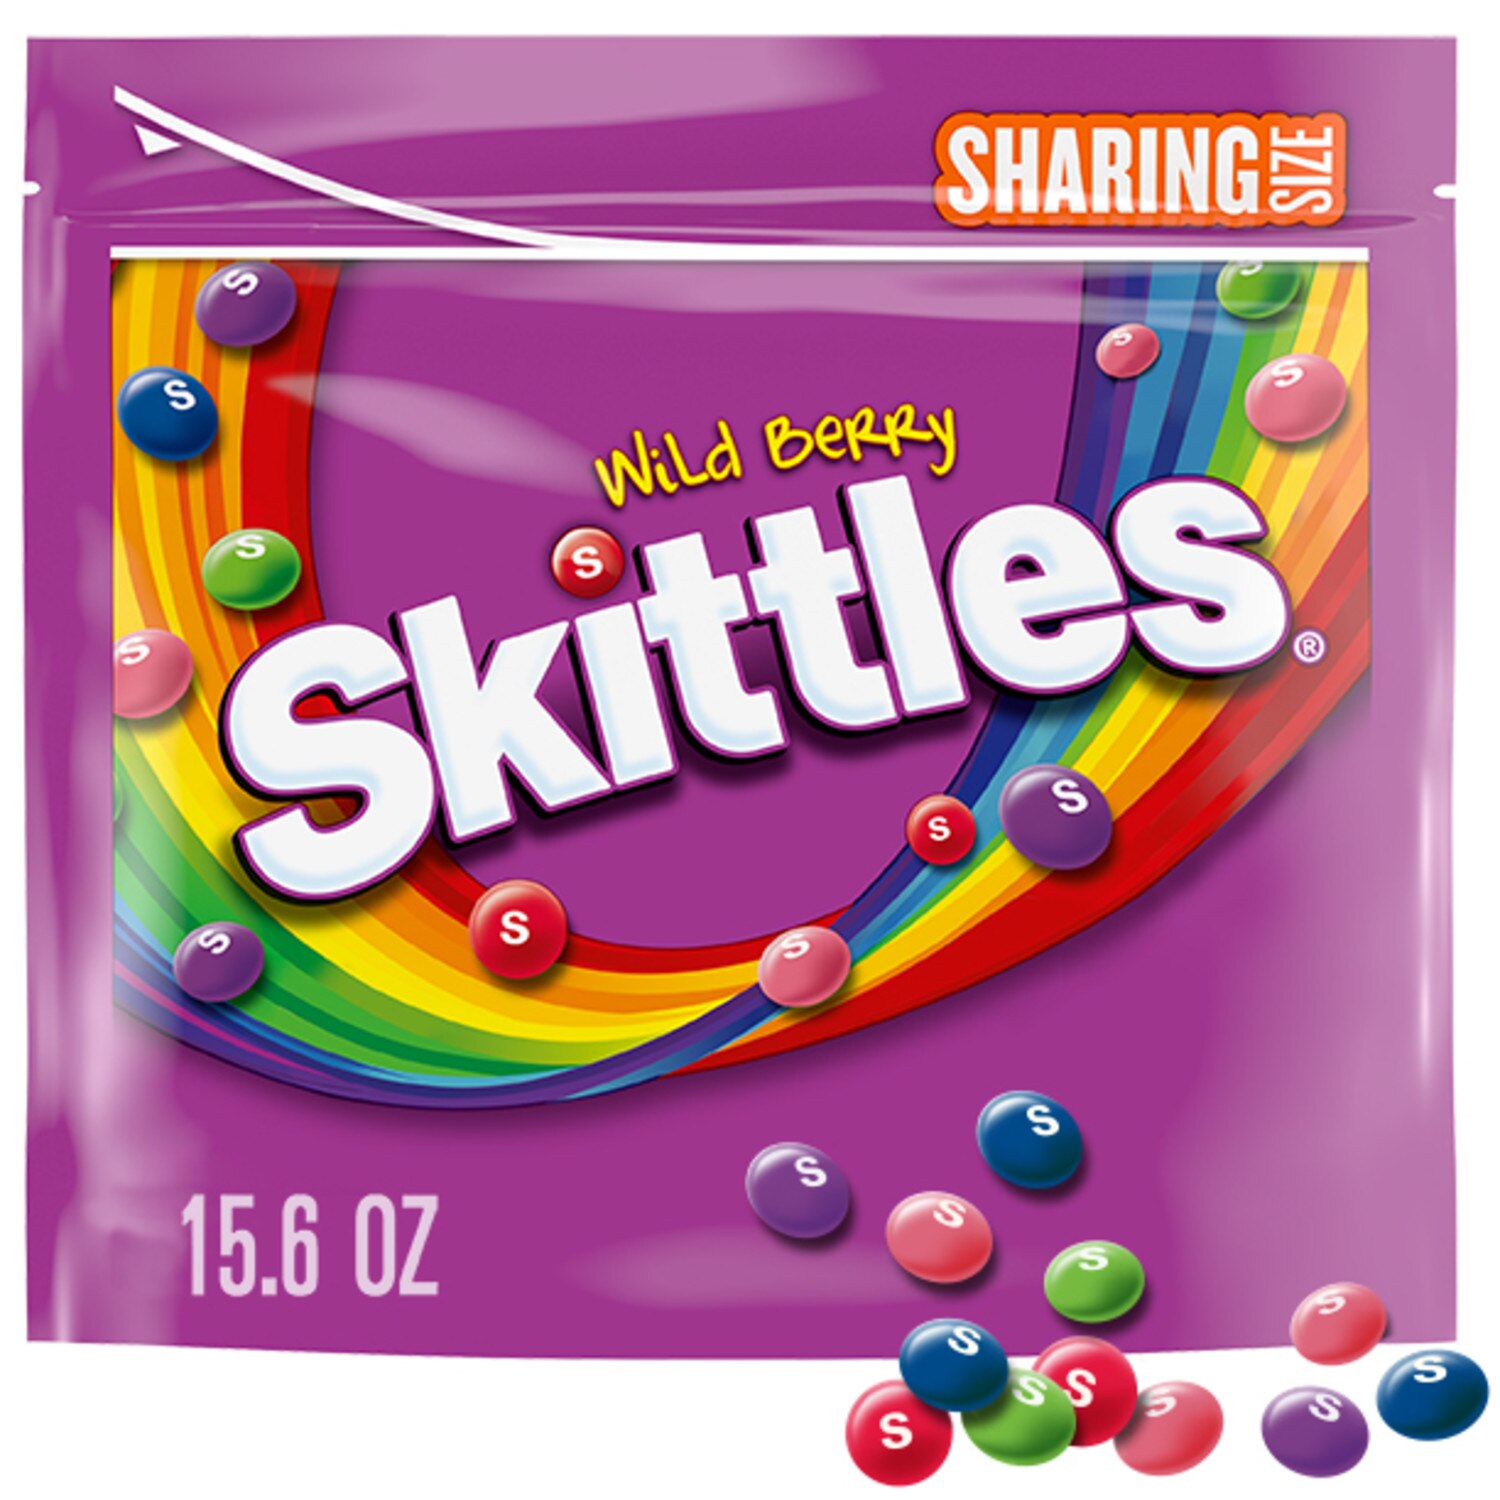  Skittles Wild Berry Sharing Size Candy, 15.6 OZ 